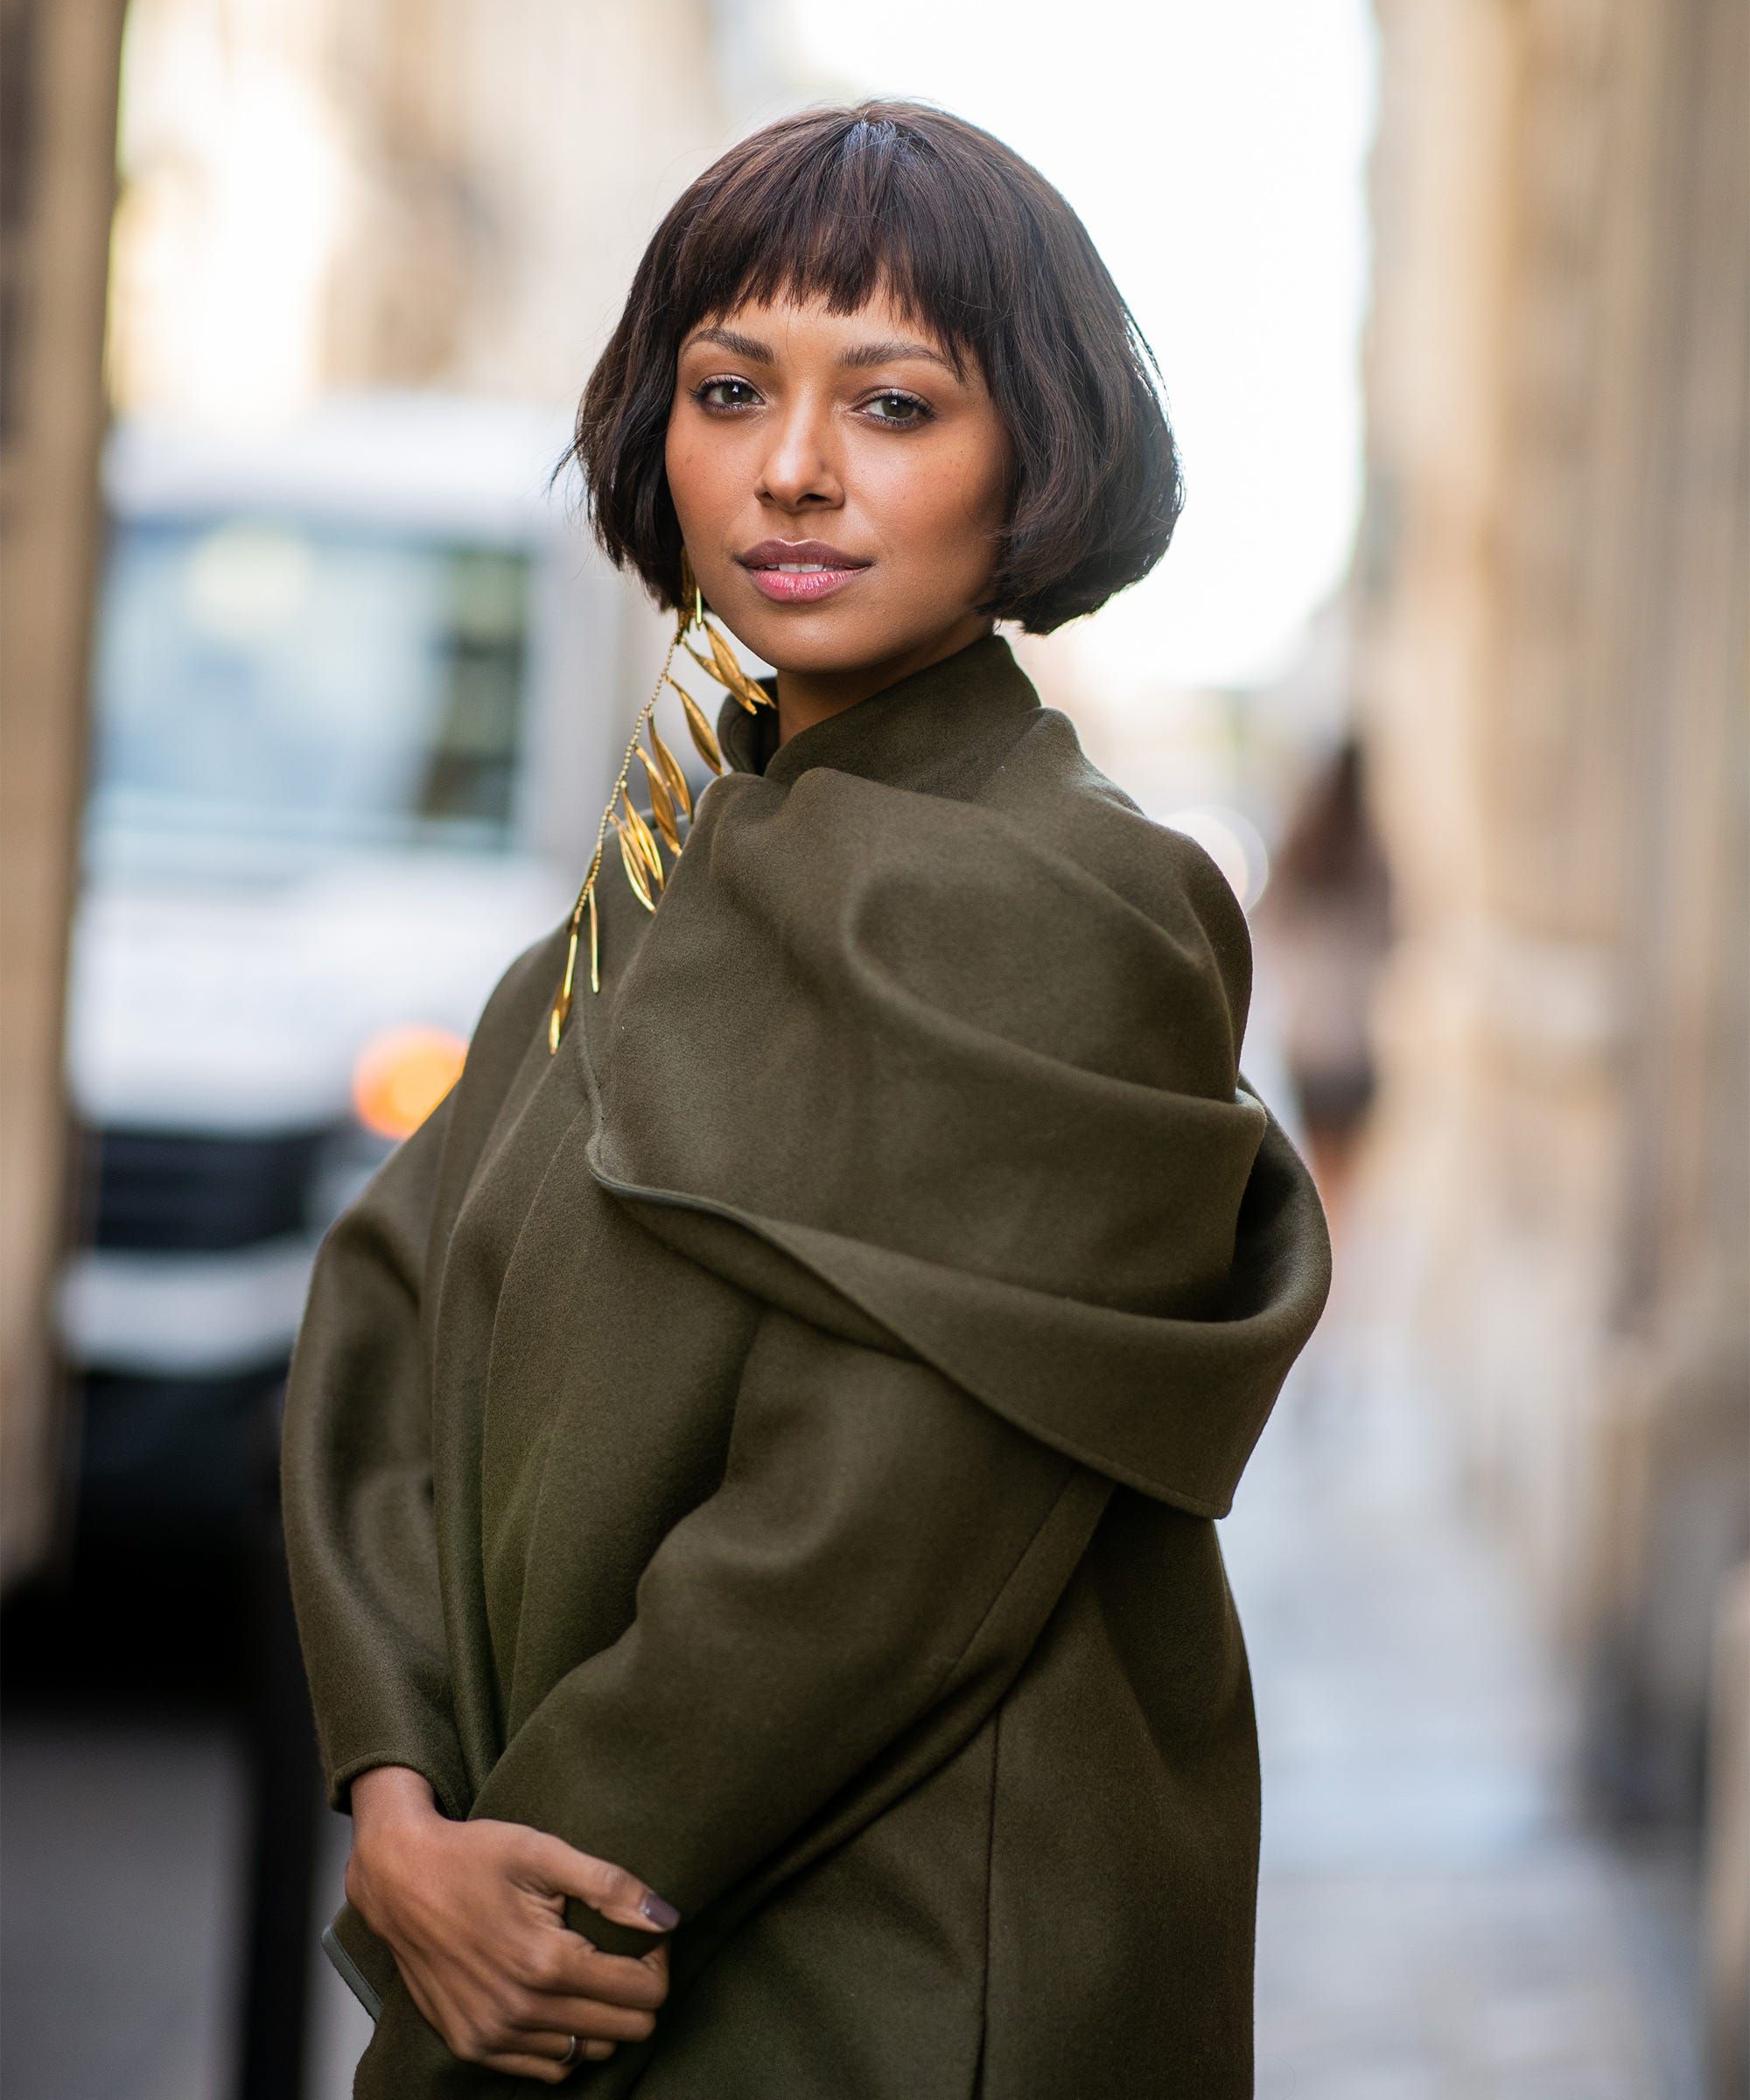 The Best Bob Haircuts You Need To Try For Fall 2019 Throughout Short Bob Hairstyles With Cropped Bangs (View 20 of 20)